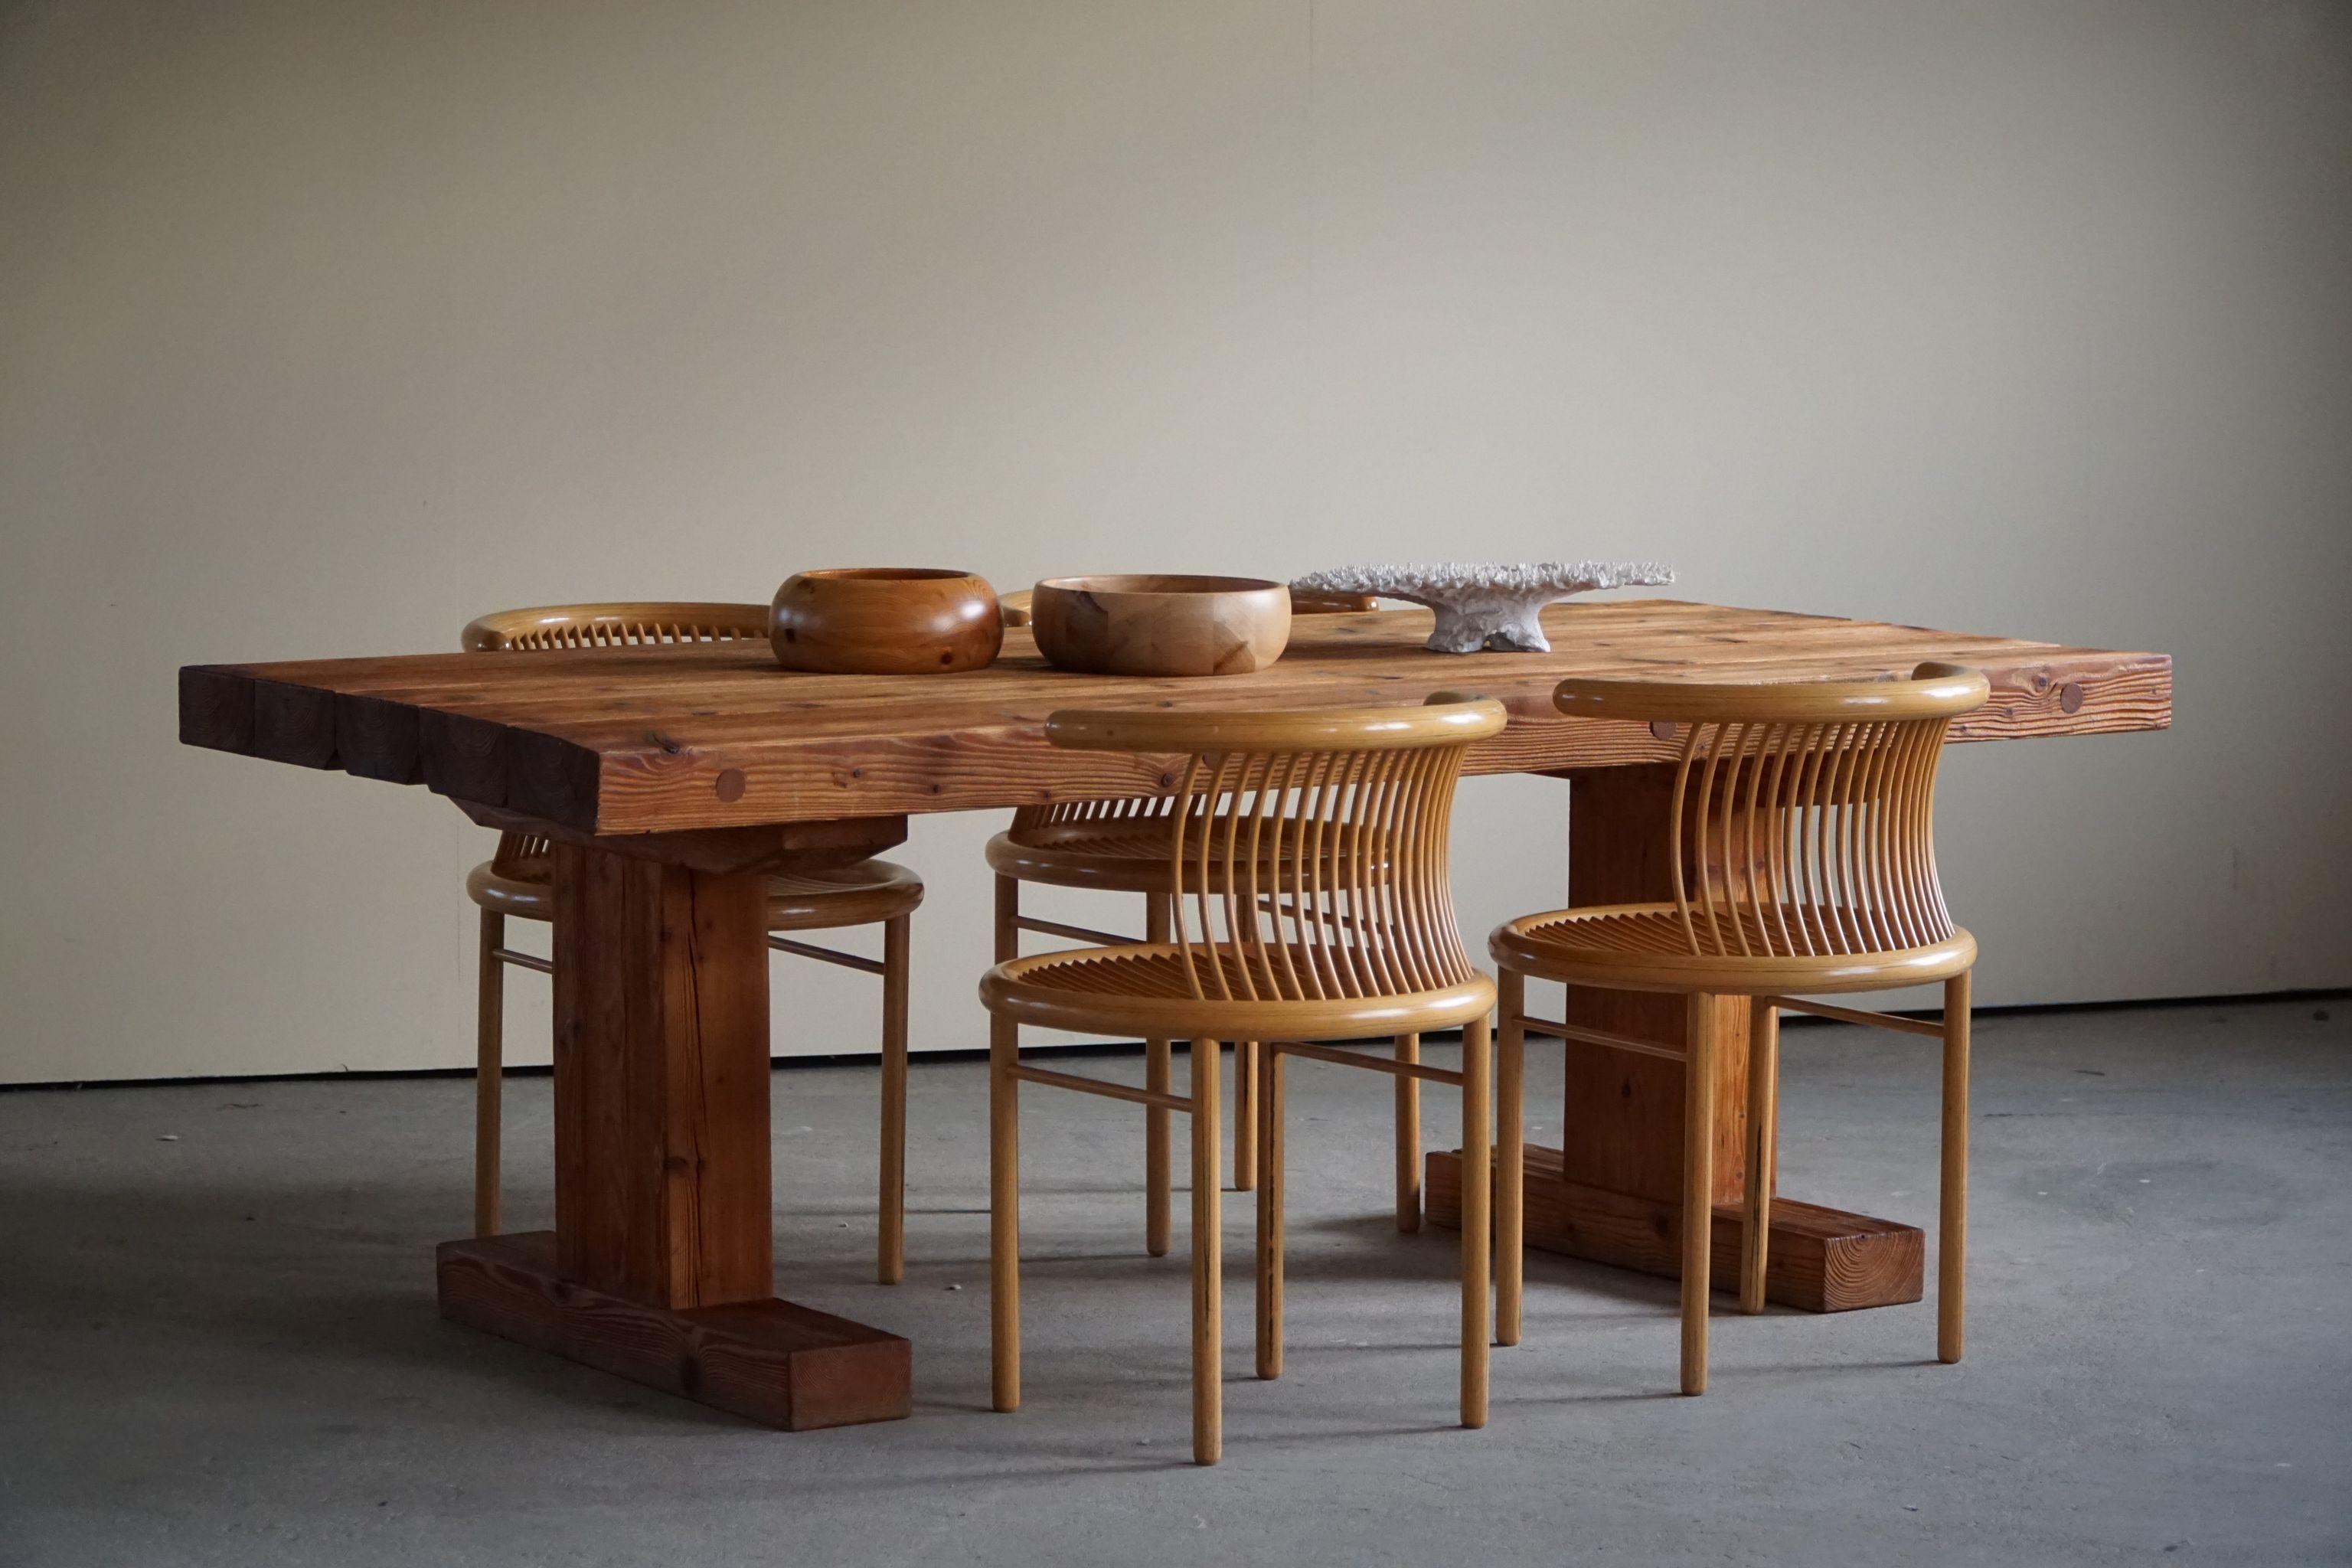 This Danish modernist/Brutalist dining table was designed and made by Jens Lyngsøe, in 1980s. The rare dining table is made of solid pine from old demolished warehouses in Copenhagen dated back to 1800s.